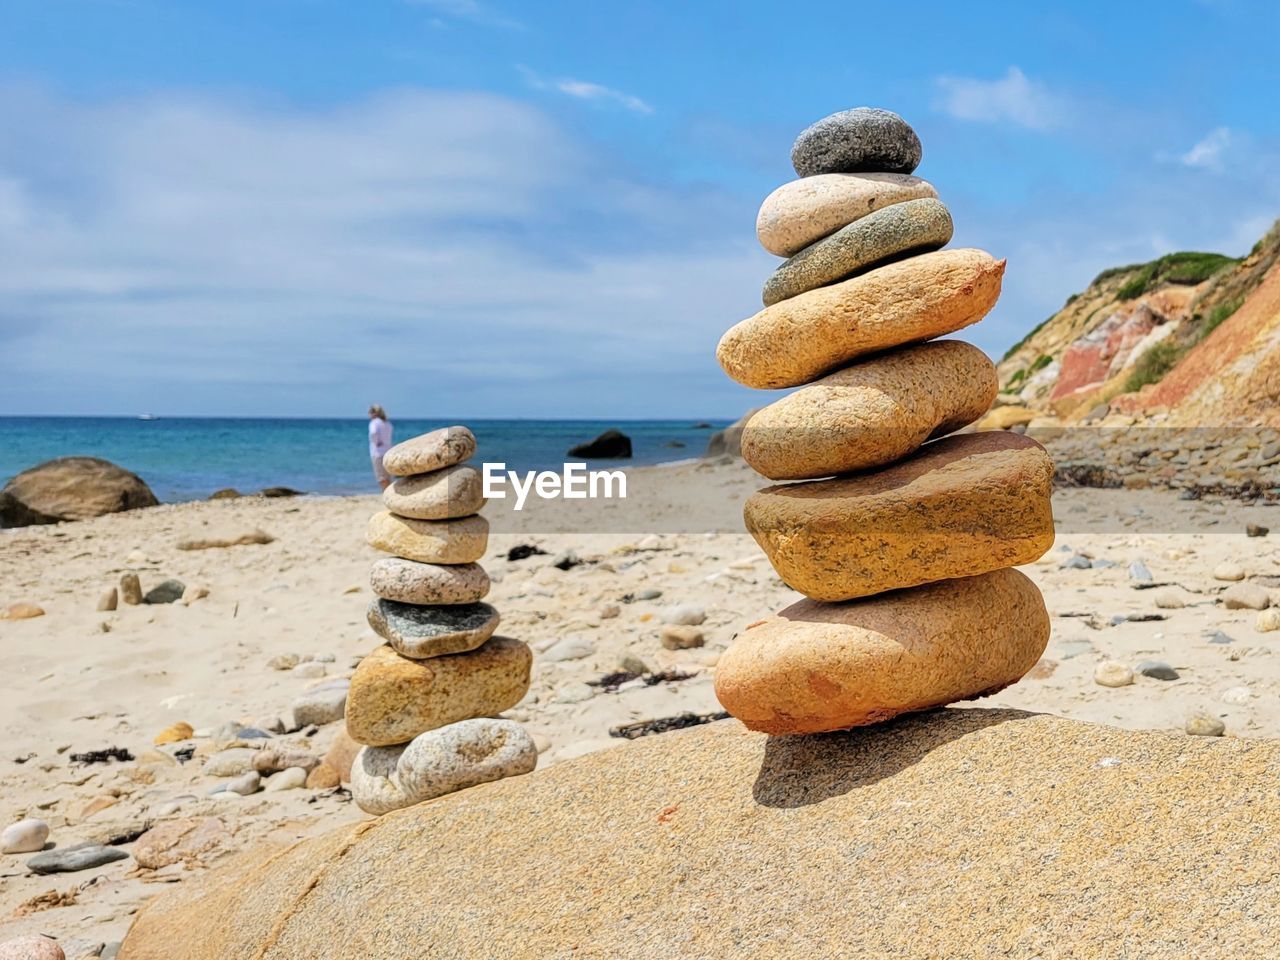 Stacked rocks on beach.